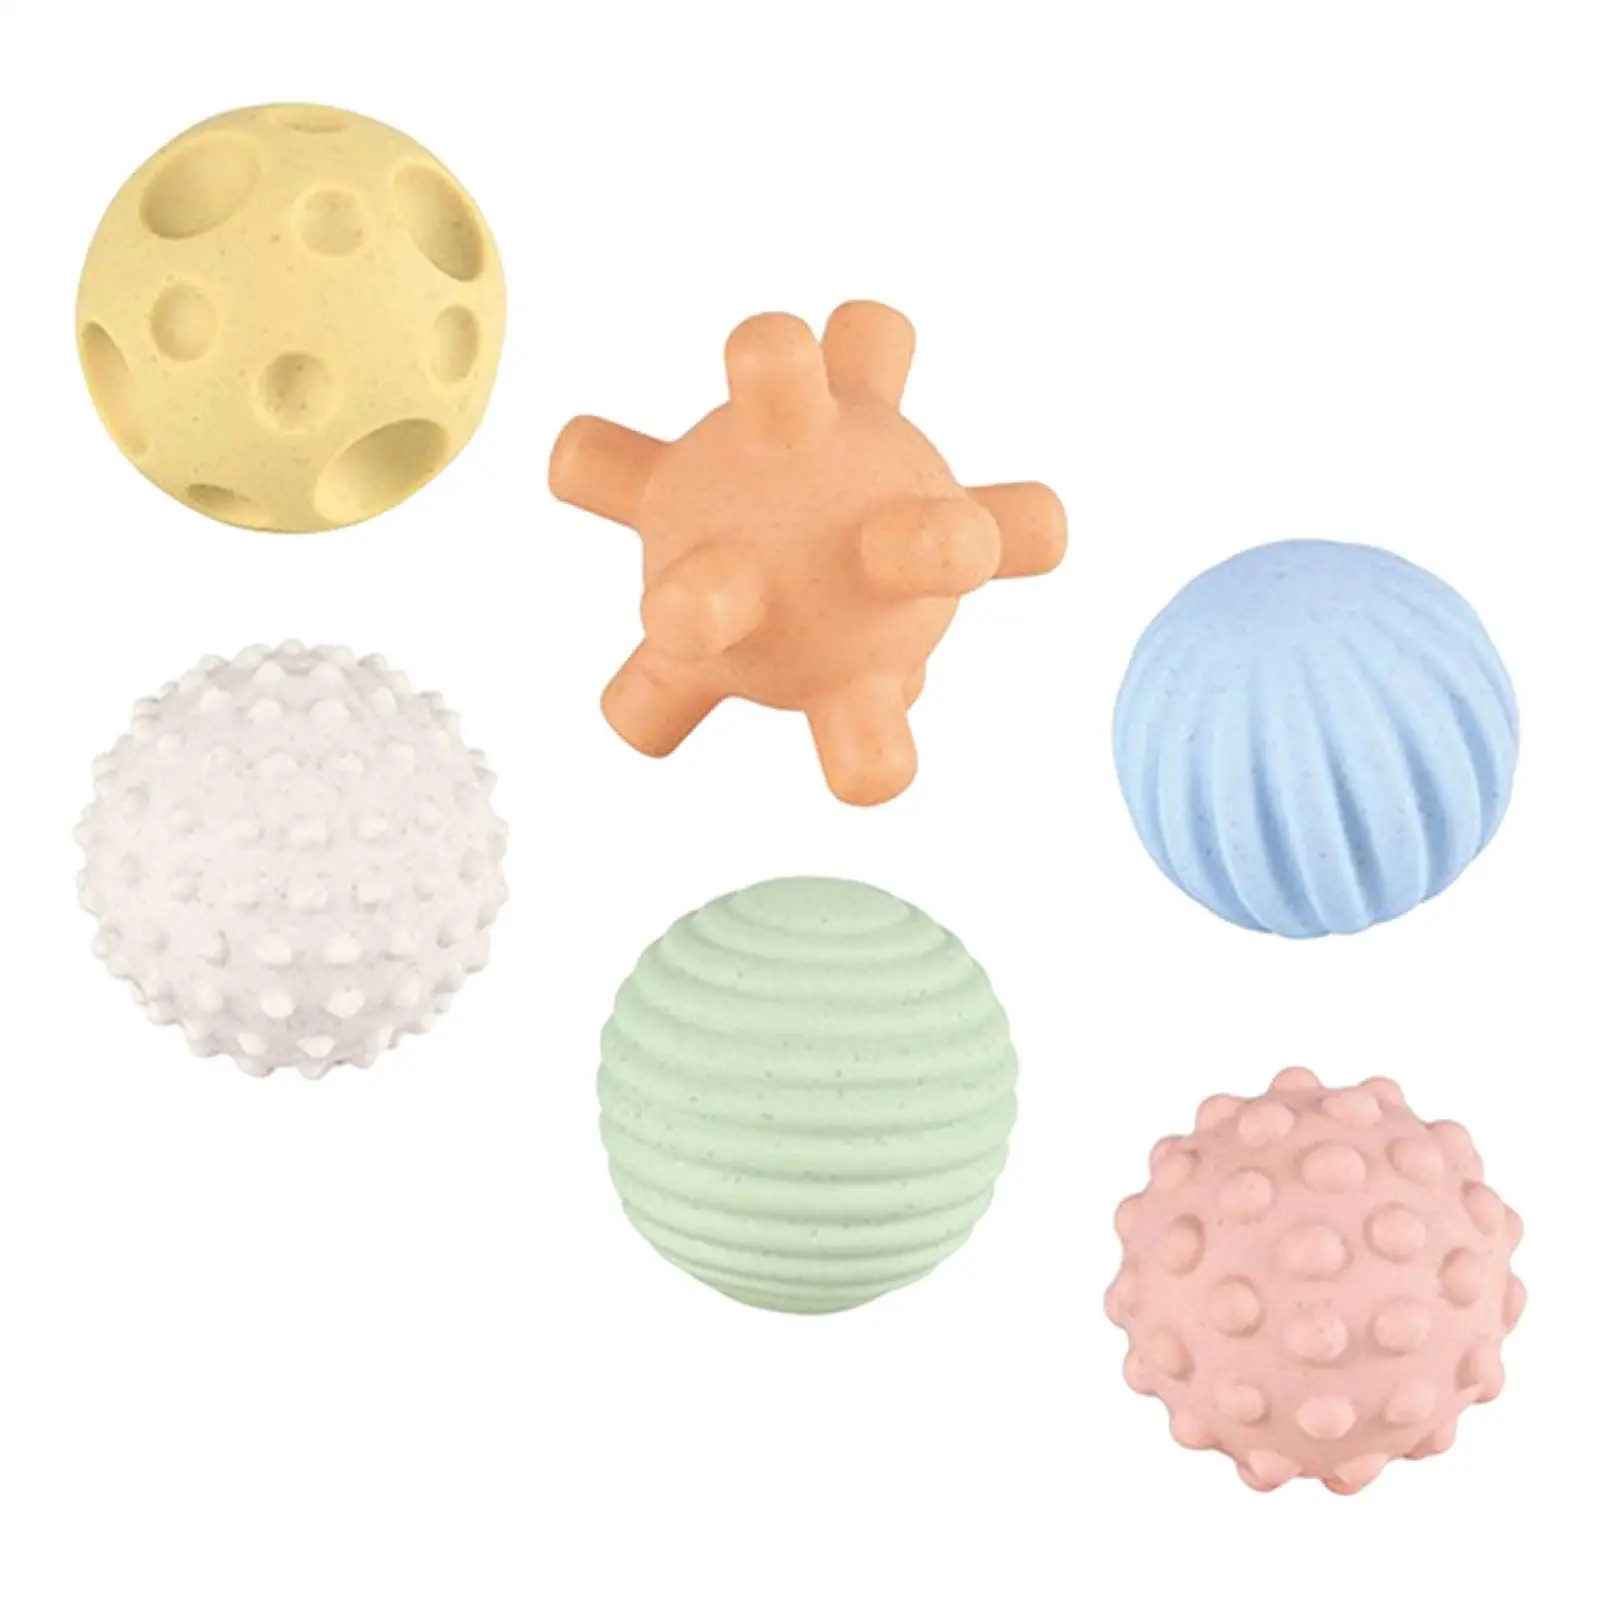 

6 Pieces Soft Sensory Toy Balls, Baby Bath Toy, Party Favor, Touch Hand Ball, Grasp Toy, Beach Ball for 6 to 12 Months